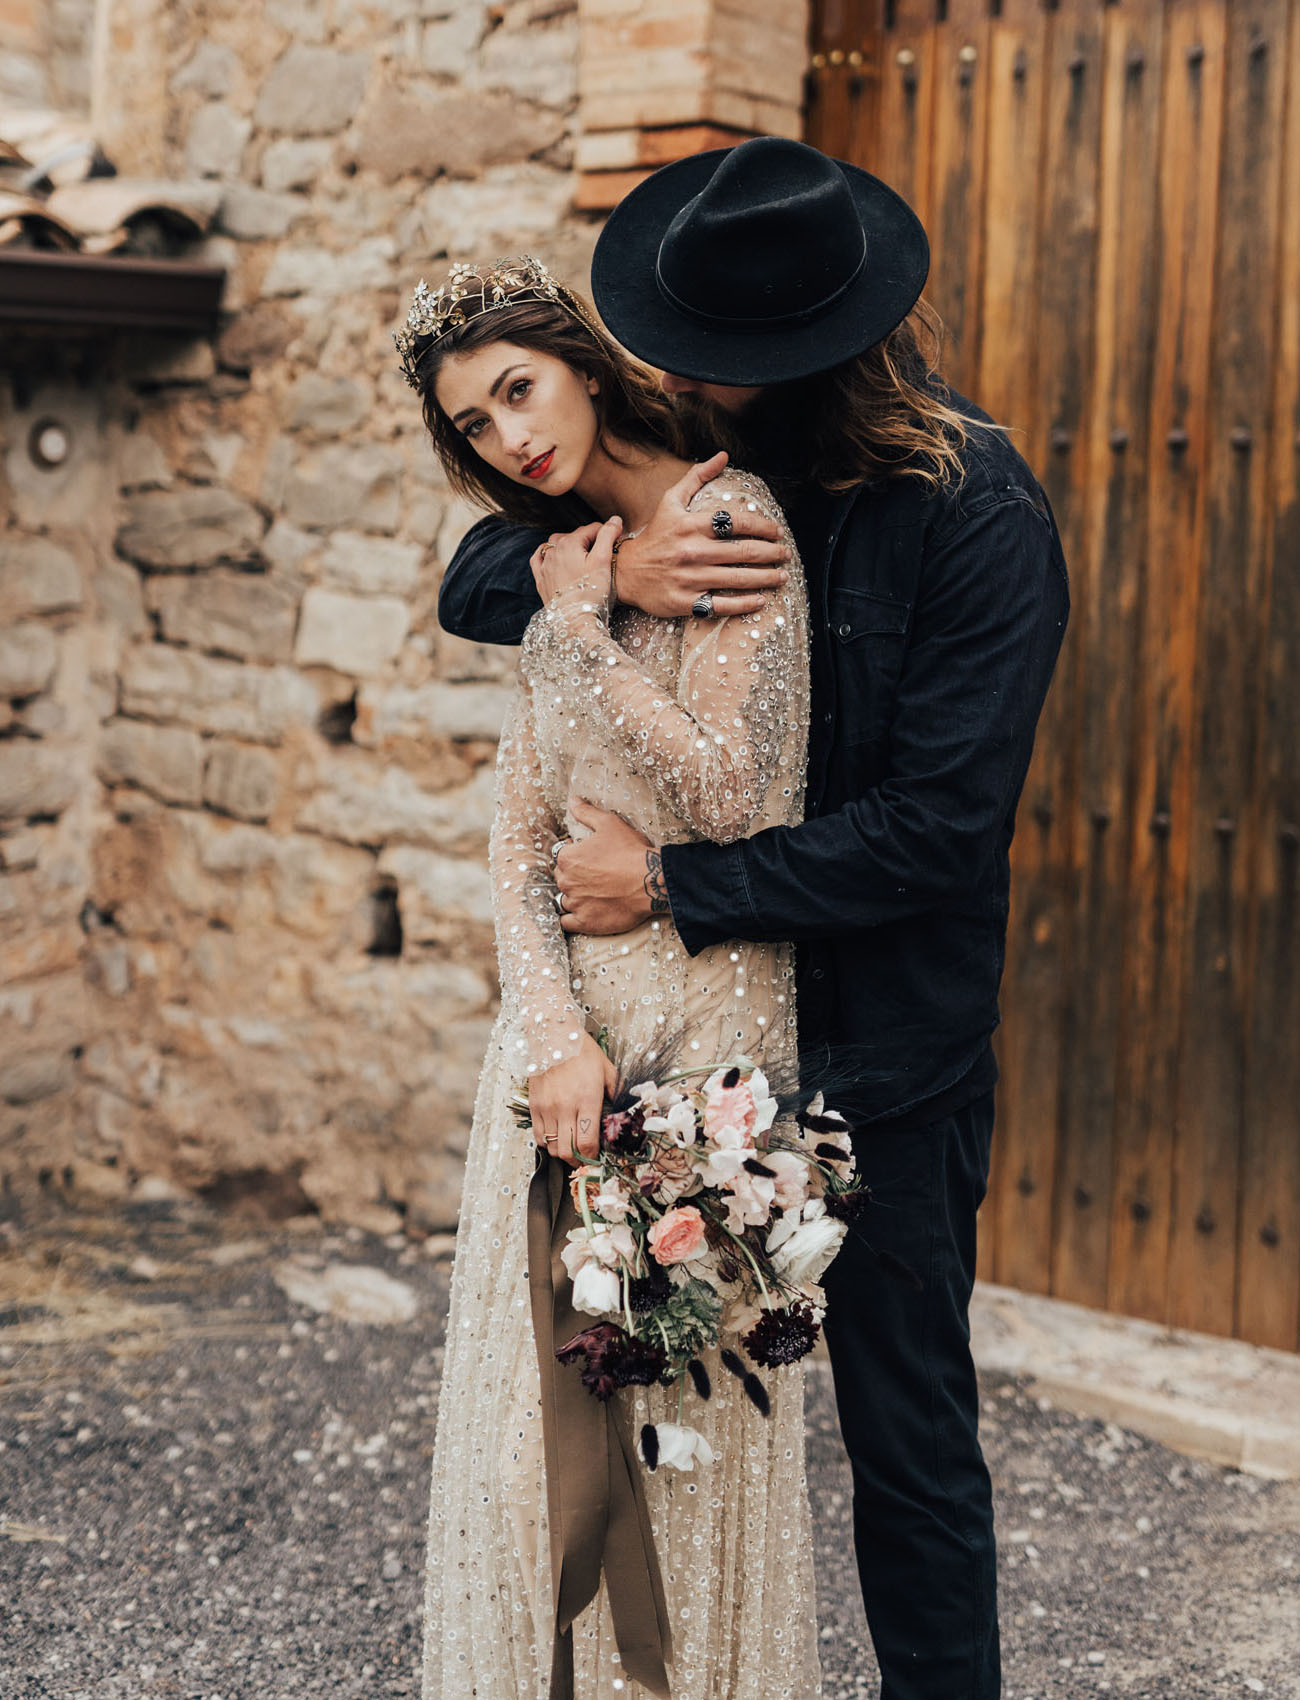 The groom was wearing a total black look with a hat, and the bride rocked a gorgeous embellished crown